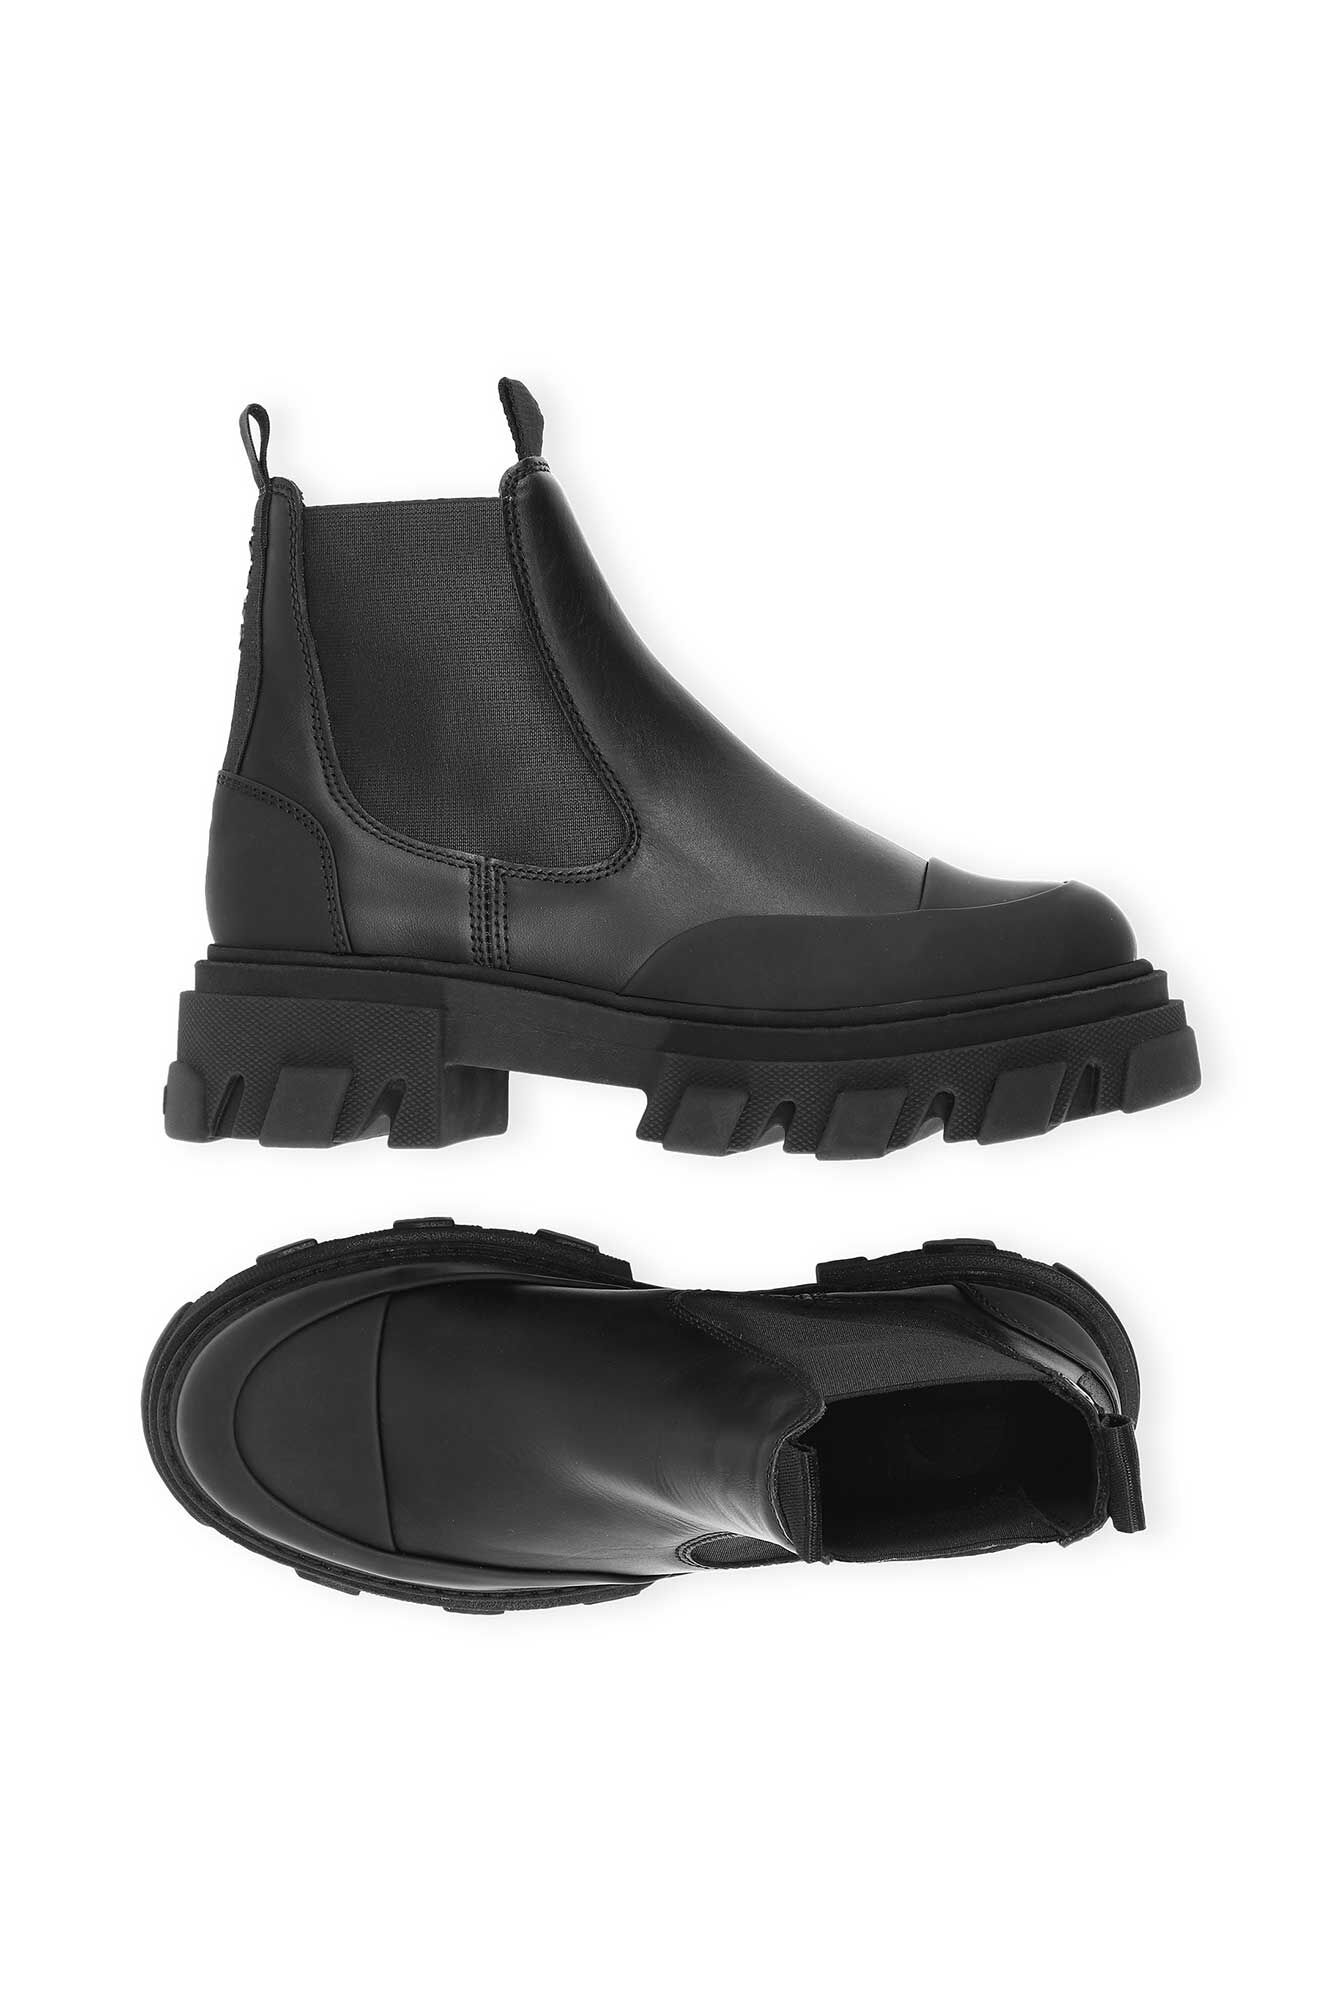 Low Chelsea Boot in Black Leather